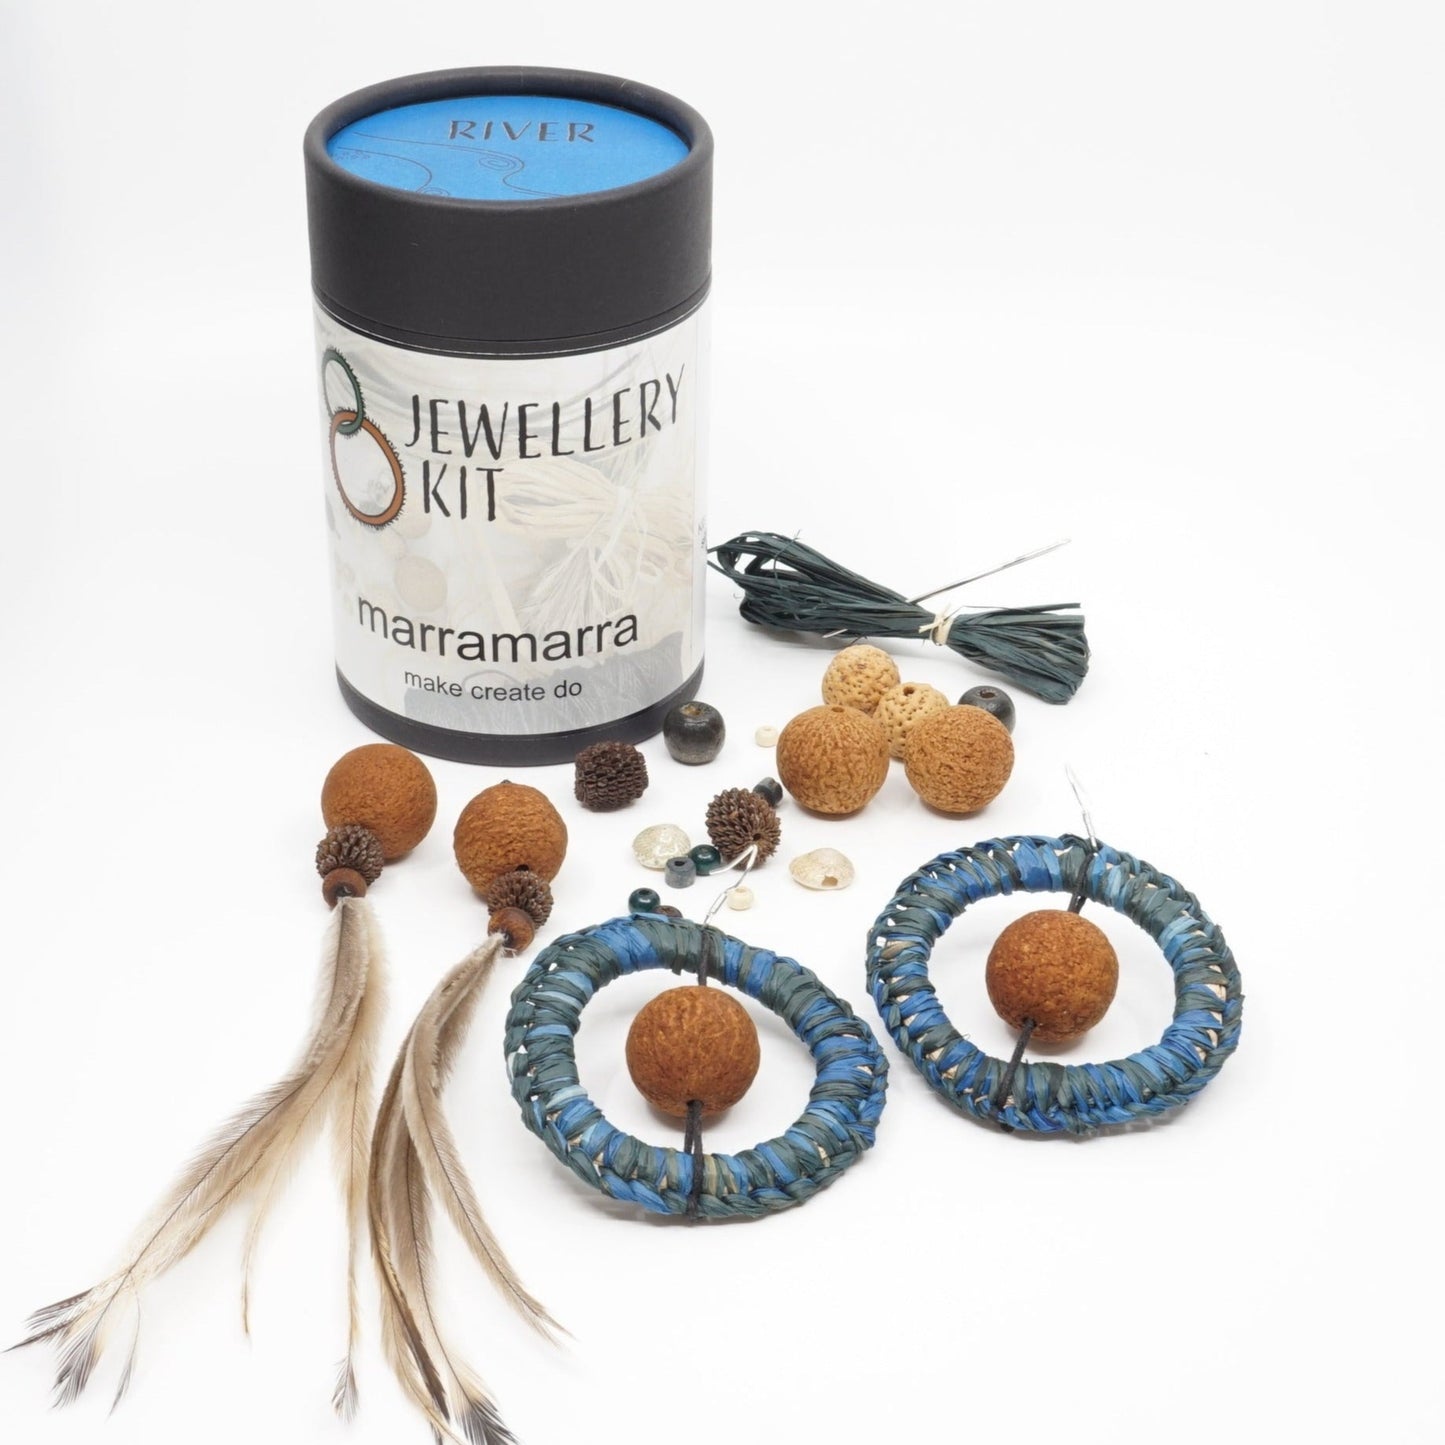 River teal earrings made from raffia, seeds, feathers and beads spread out of an Aboriginal jewellery kit